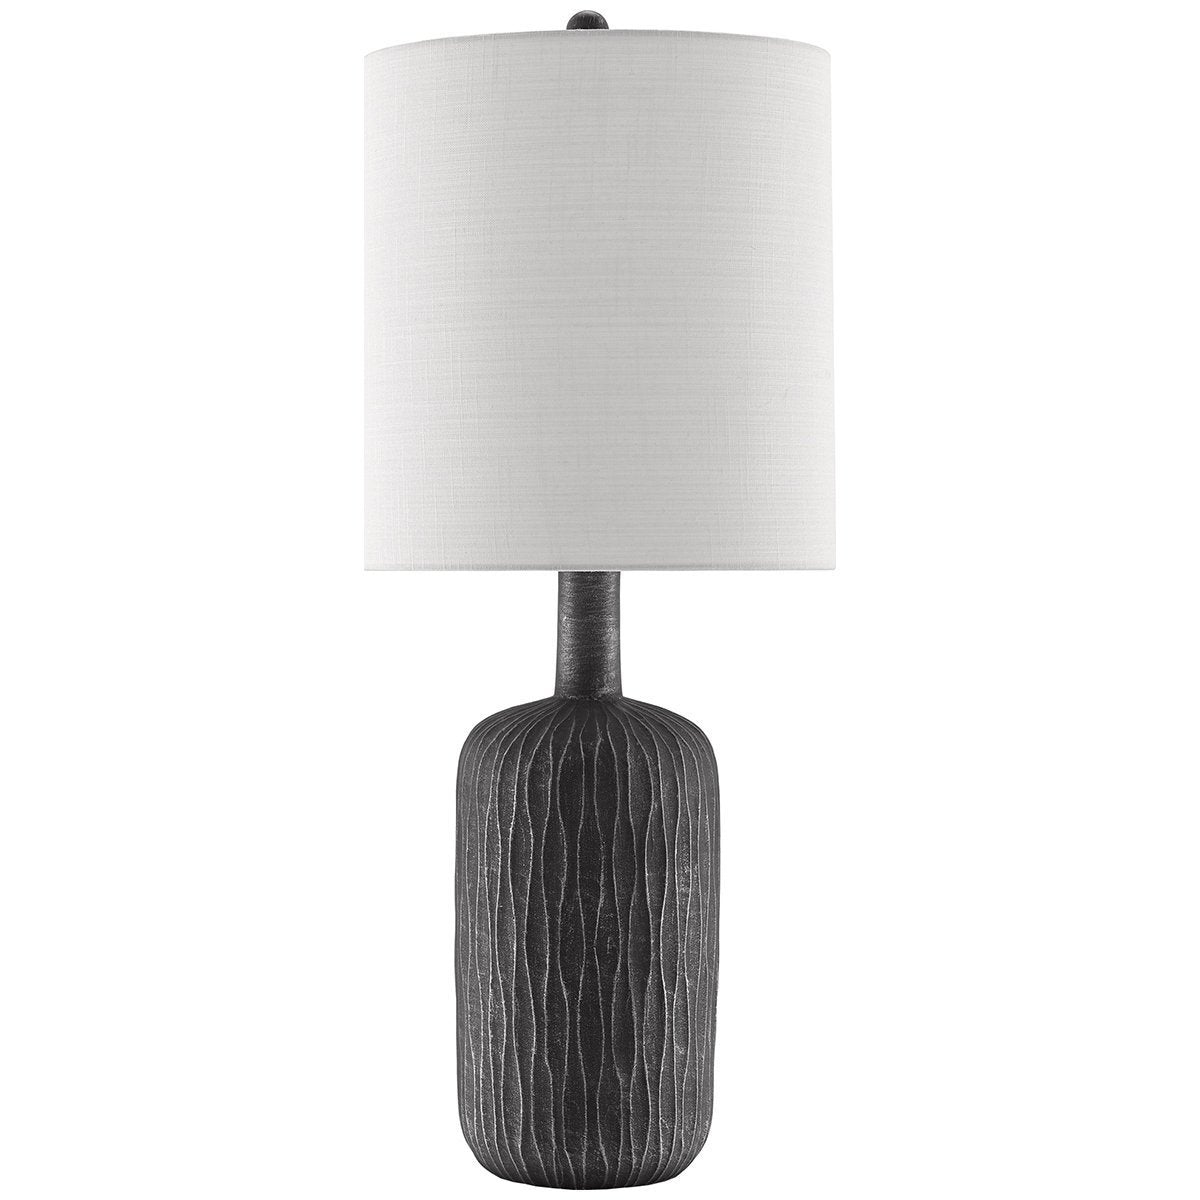 Currey and Company Rivers Table Lamp